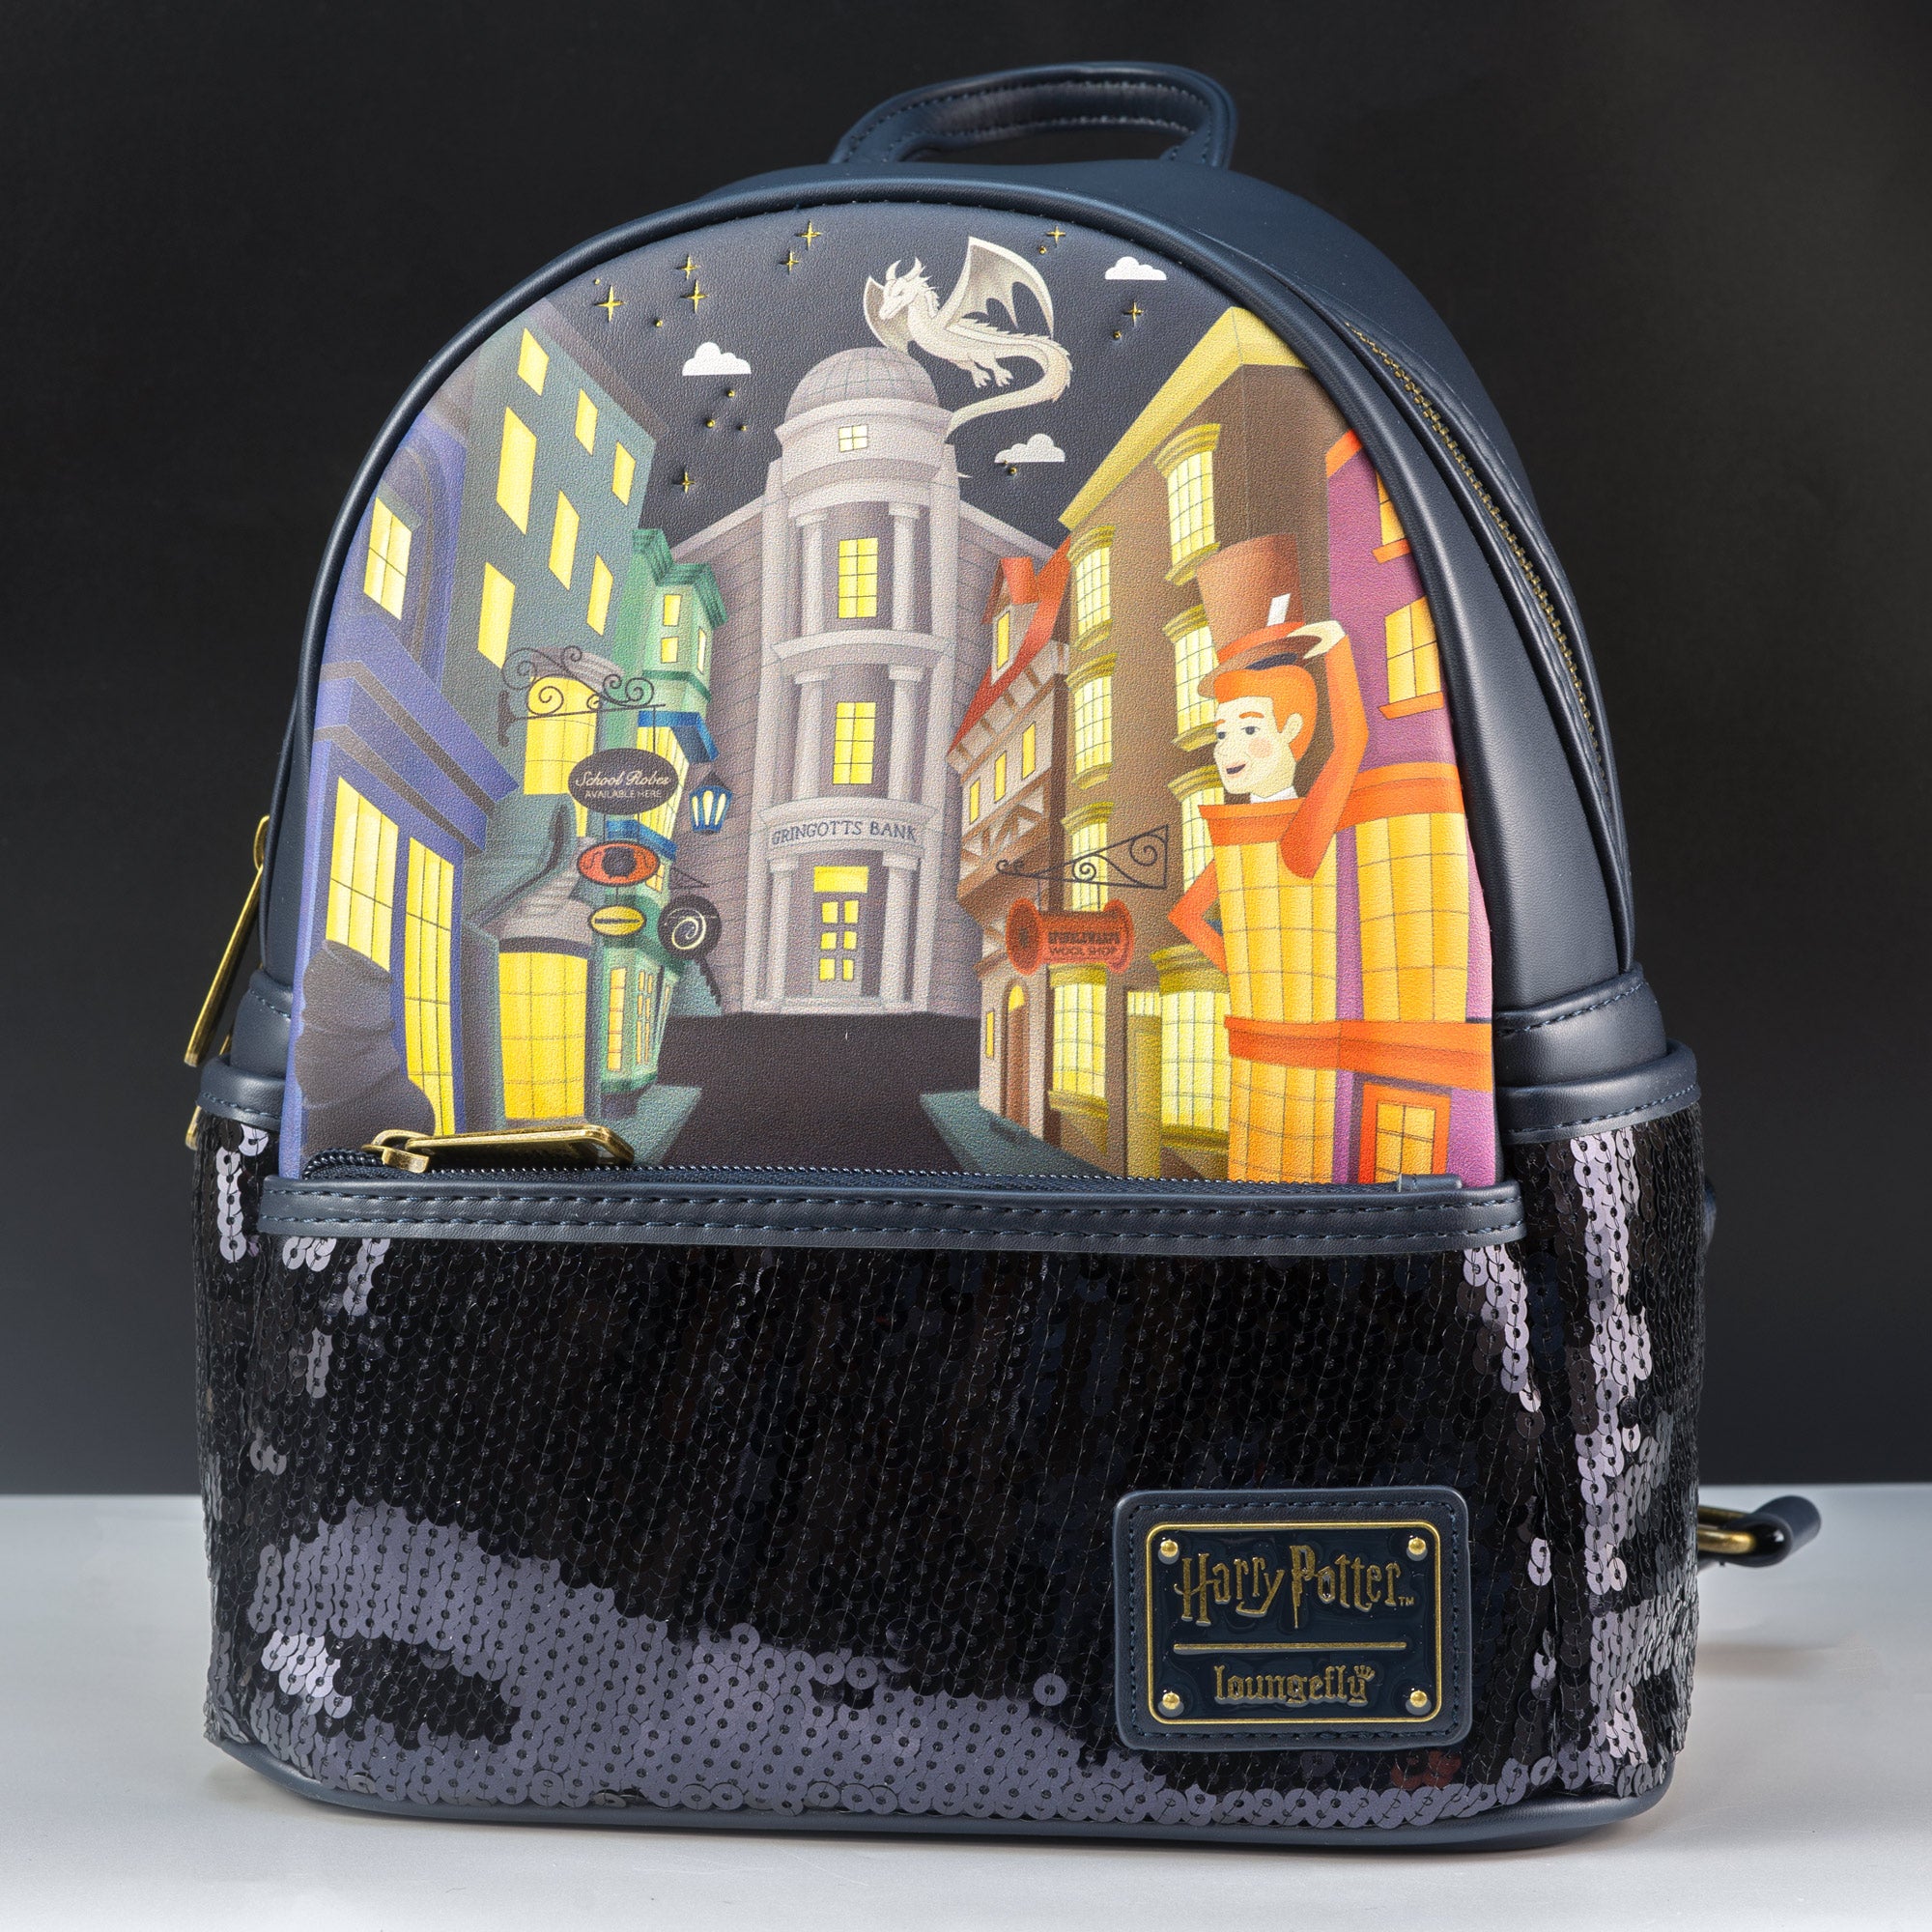 Loungefly x Harry Potter Diagon Alley Sequin Mini Backpack